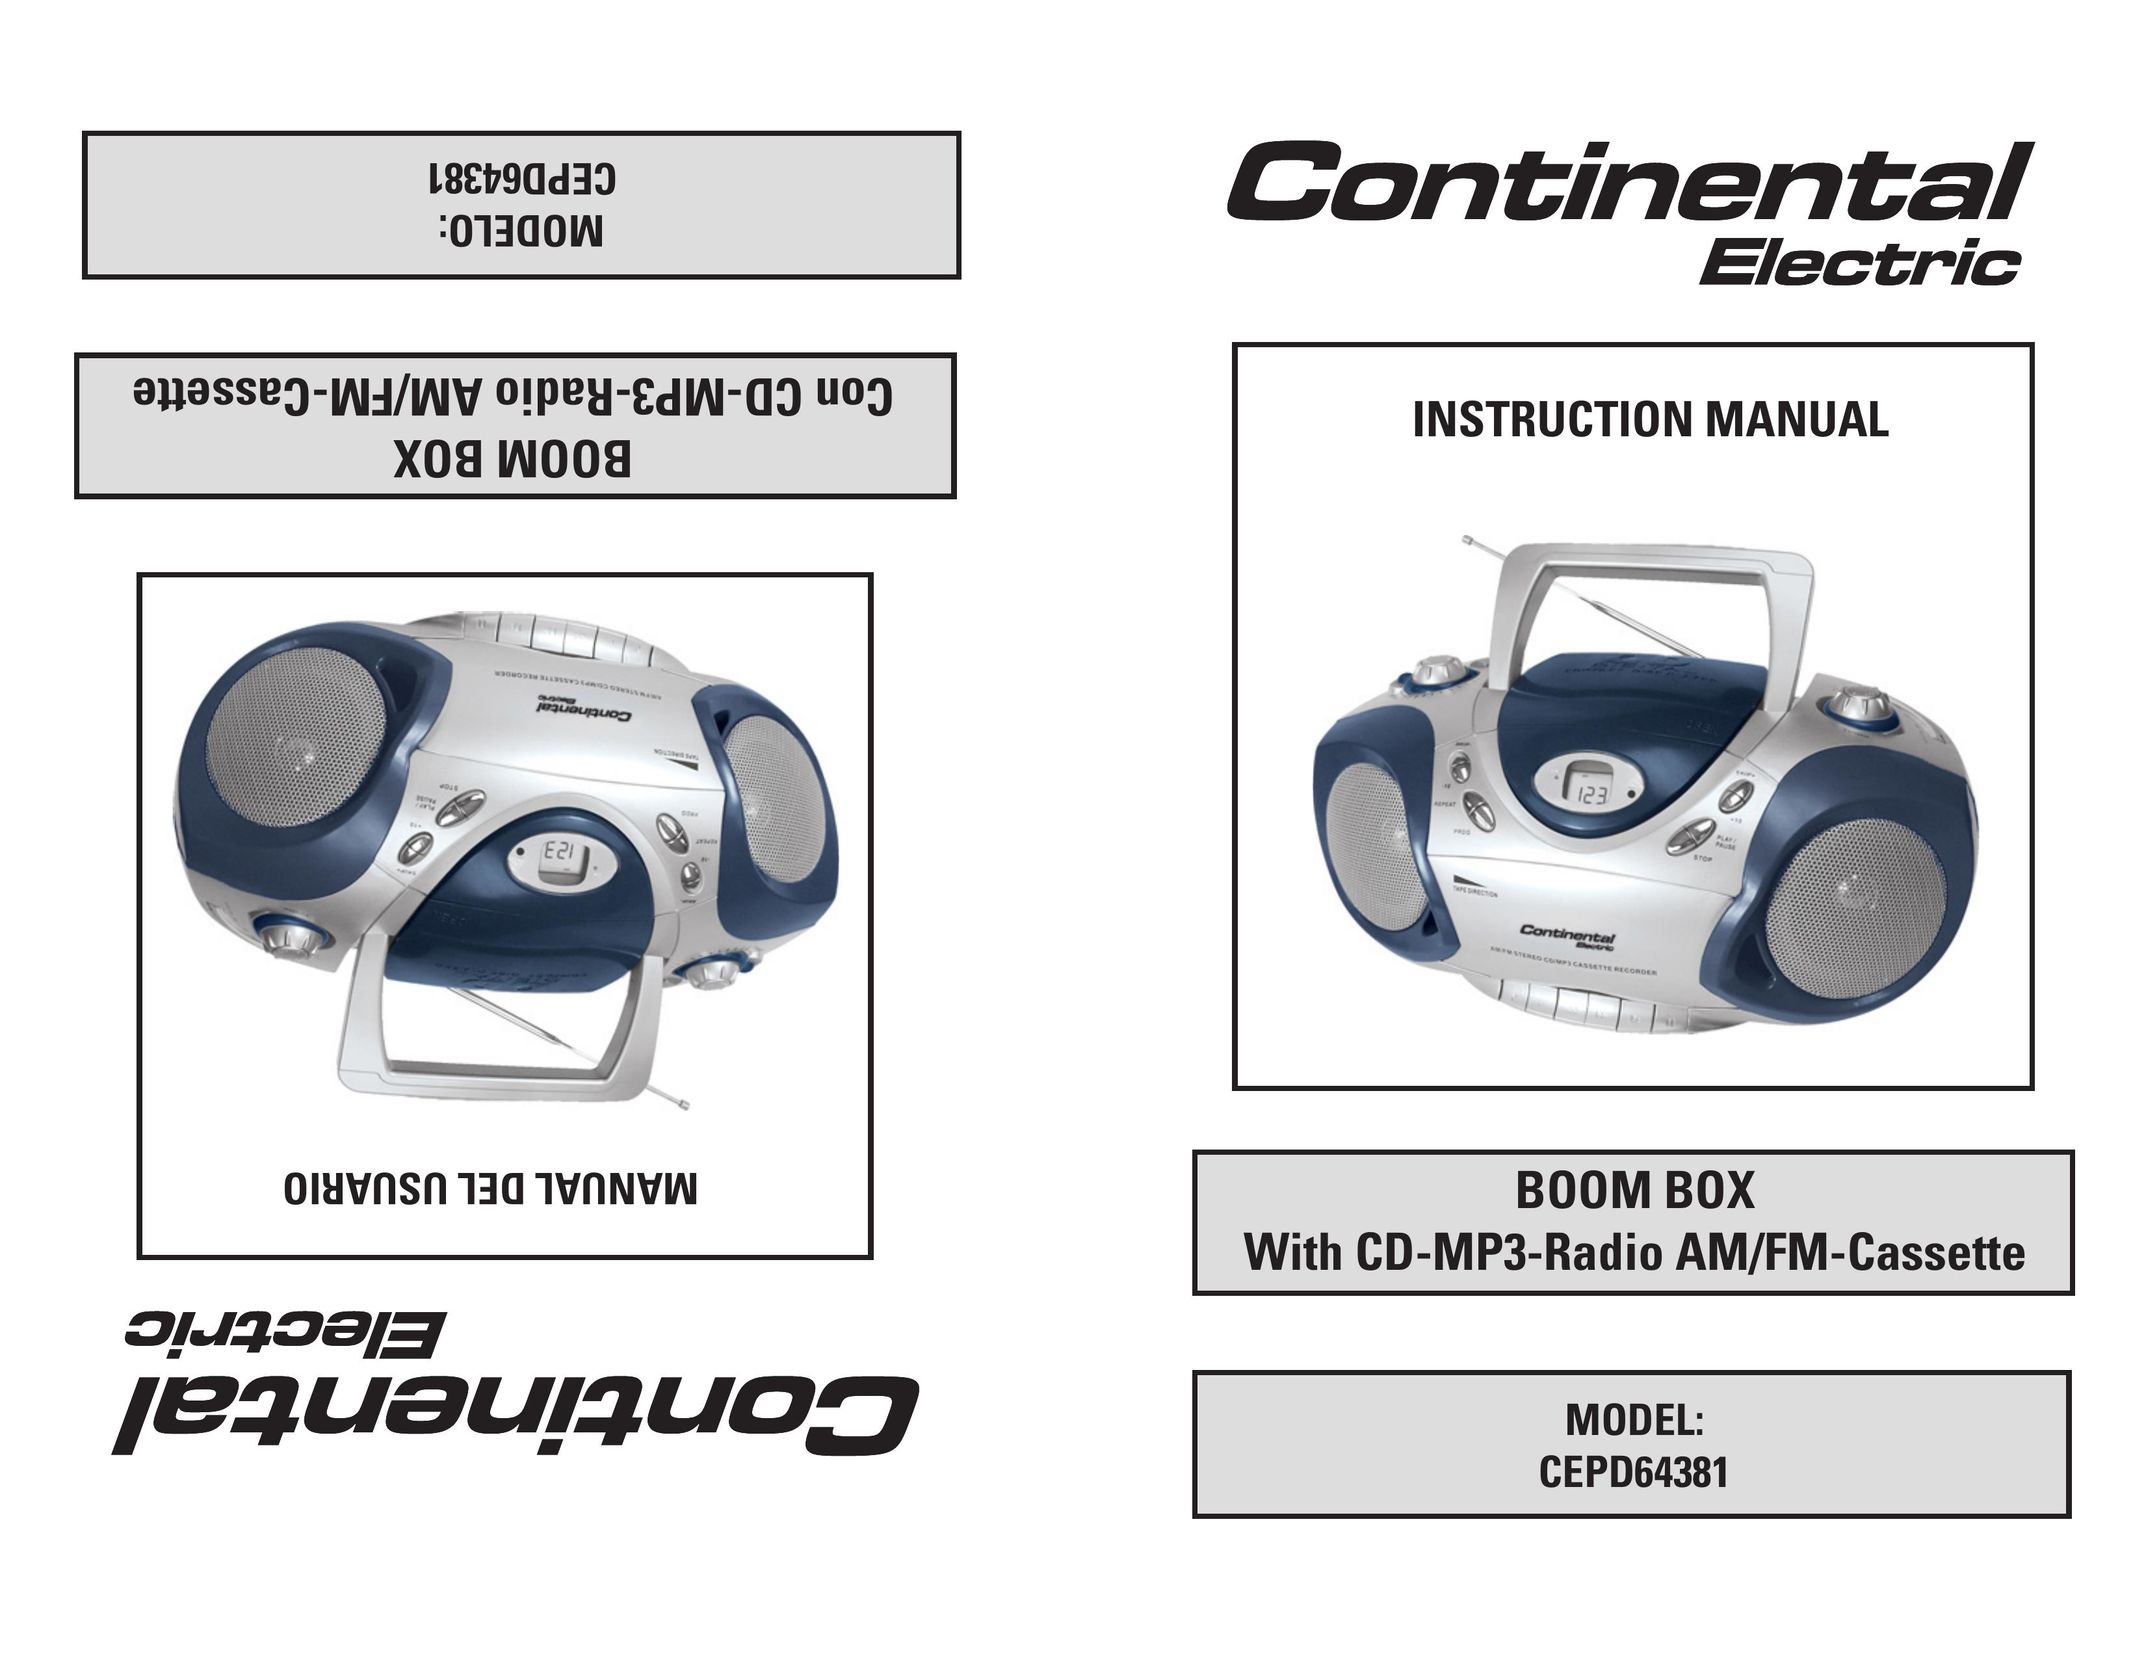 Continental Electric CEPD64381 Portable CD Player User Manual